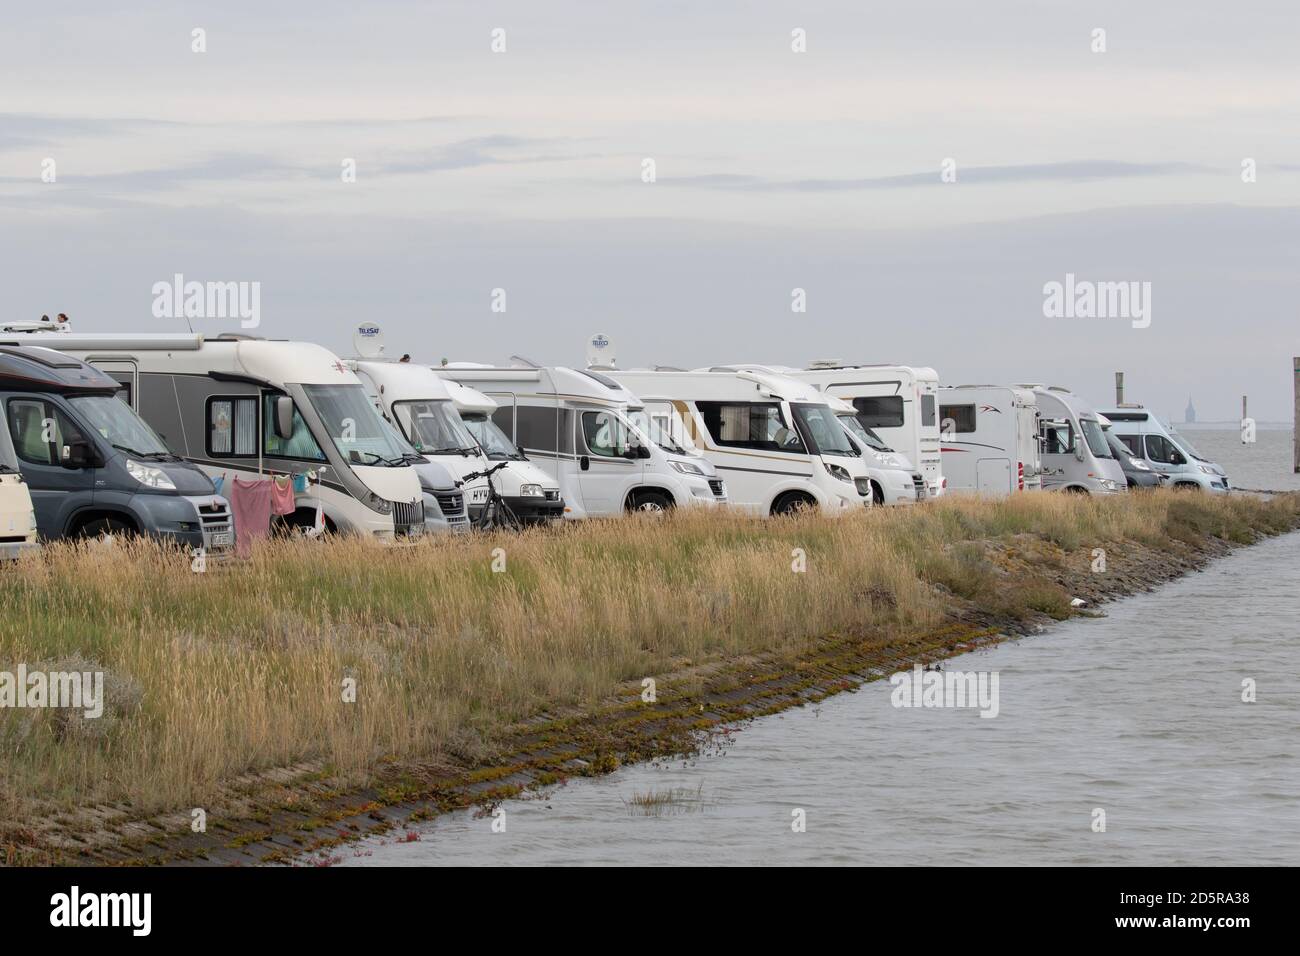 A line of parked Camper Vans, Motorhomes. East Frisia, Lower Saxony. Germany. October 2020 Stock Photo